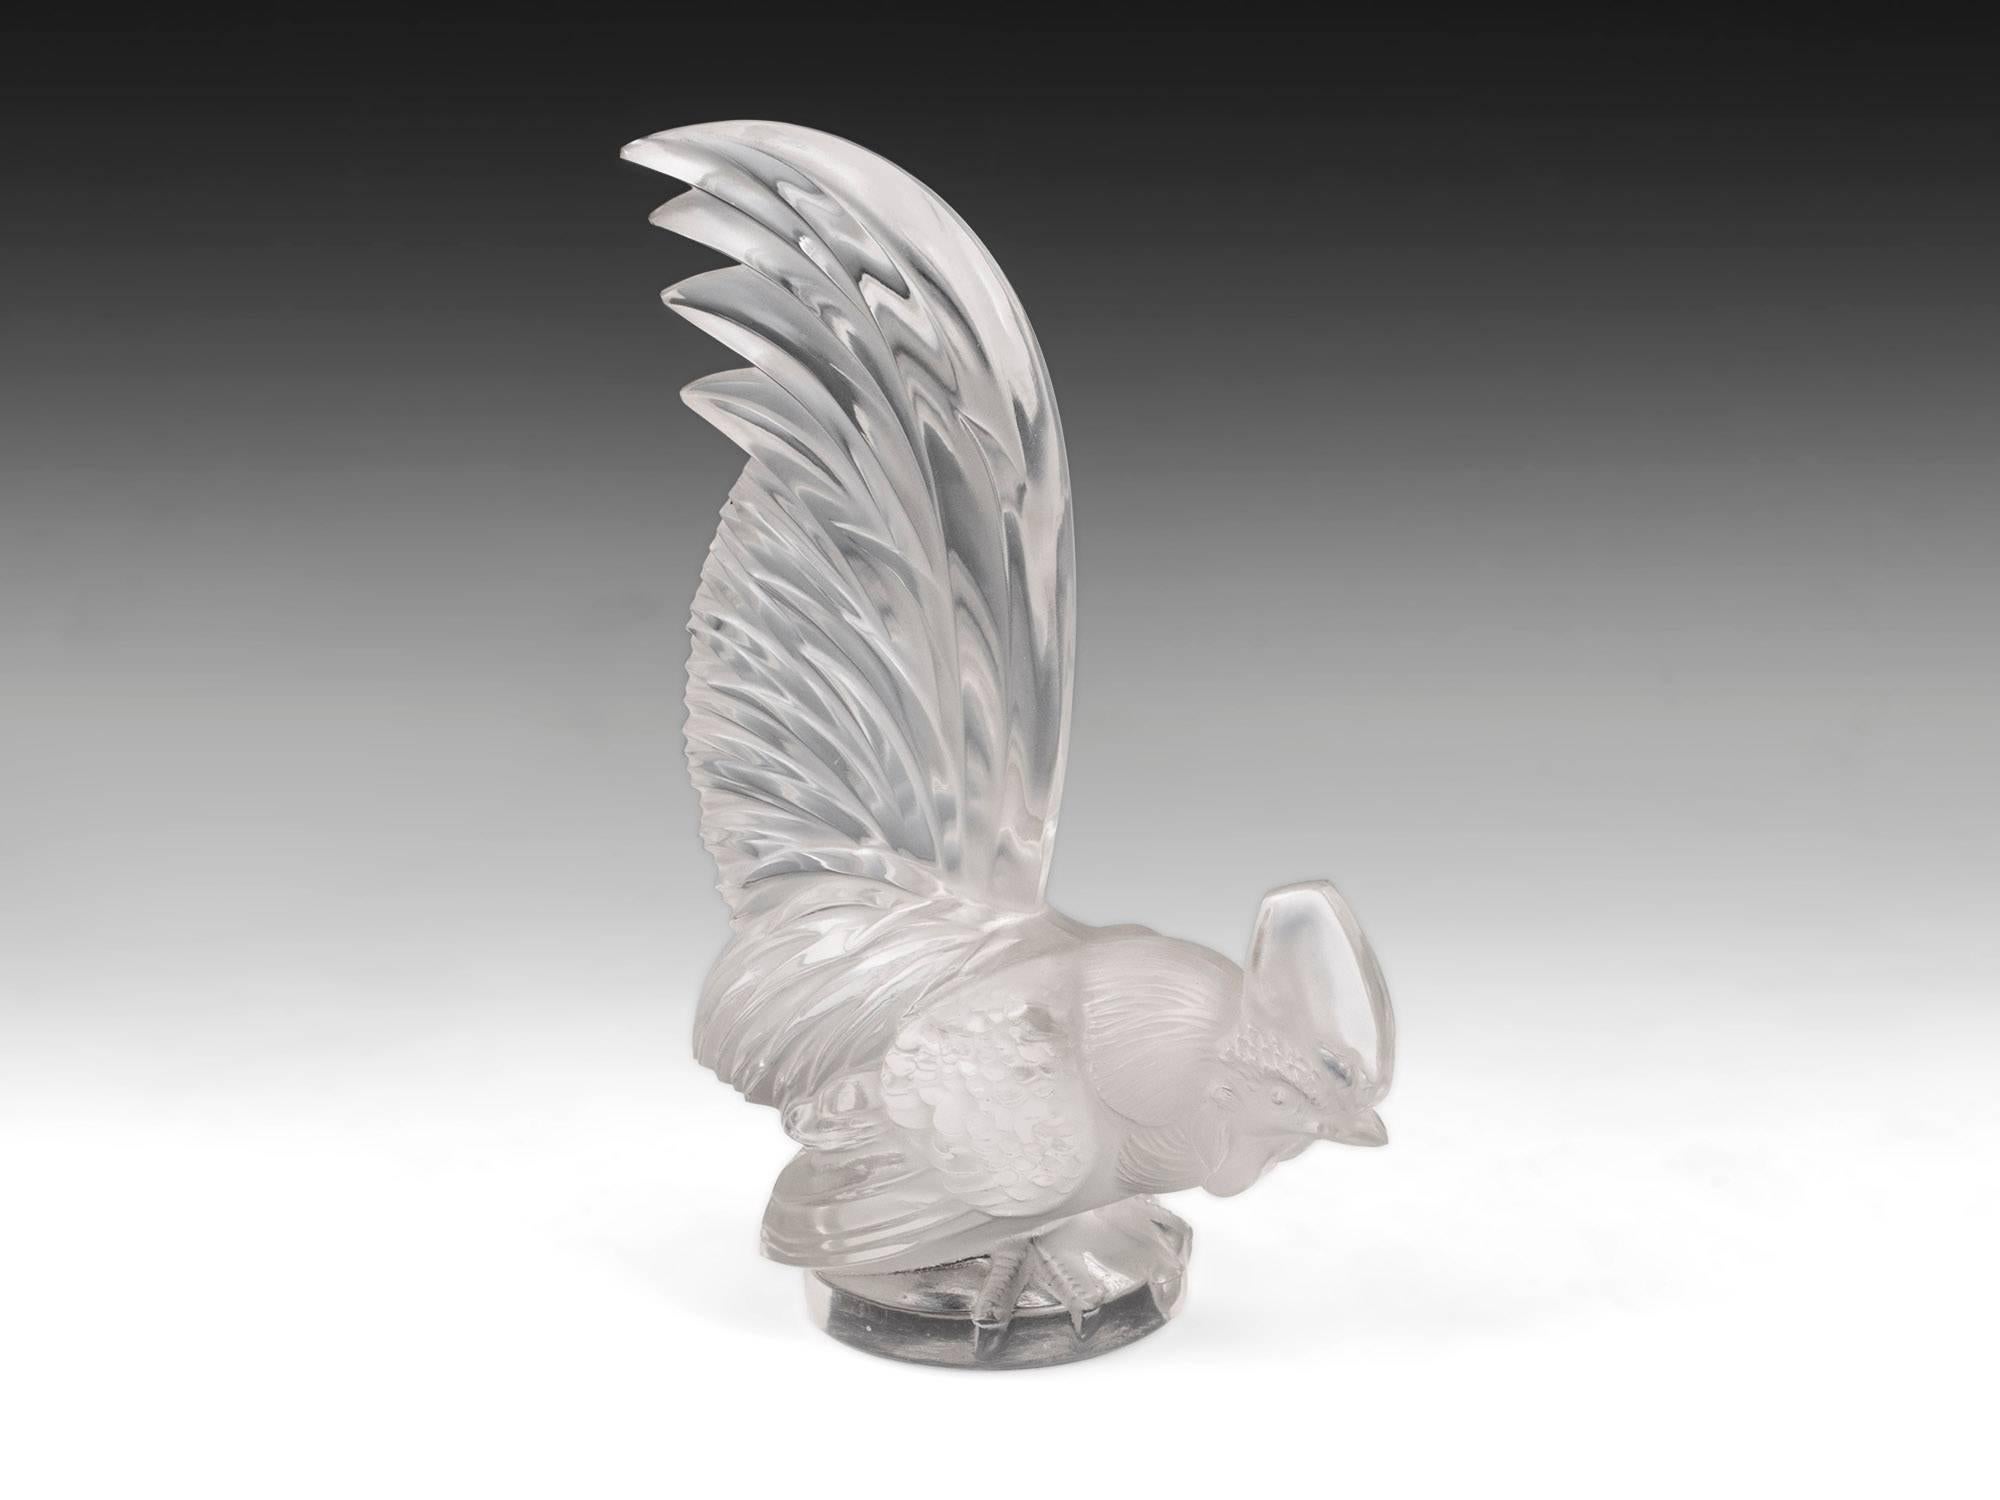 Lalique Coq Nain / Cockerel car mascot. Model number: 1135
These were originally made as car hood ornaments in the 1920s by famous glass make René Jules Lalique, who started a company using his own name, which still creates fine glassware today.